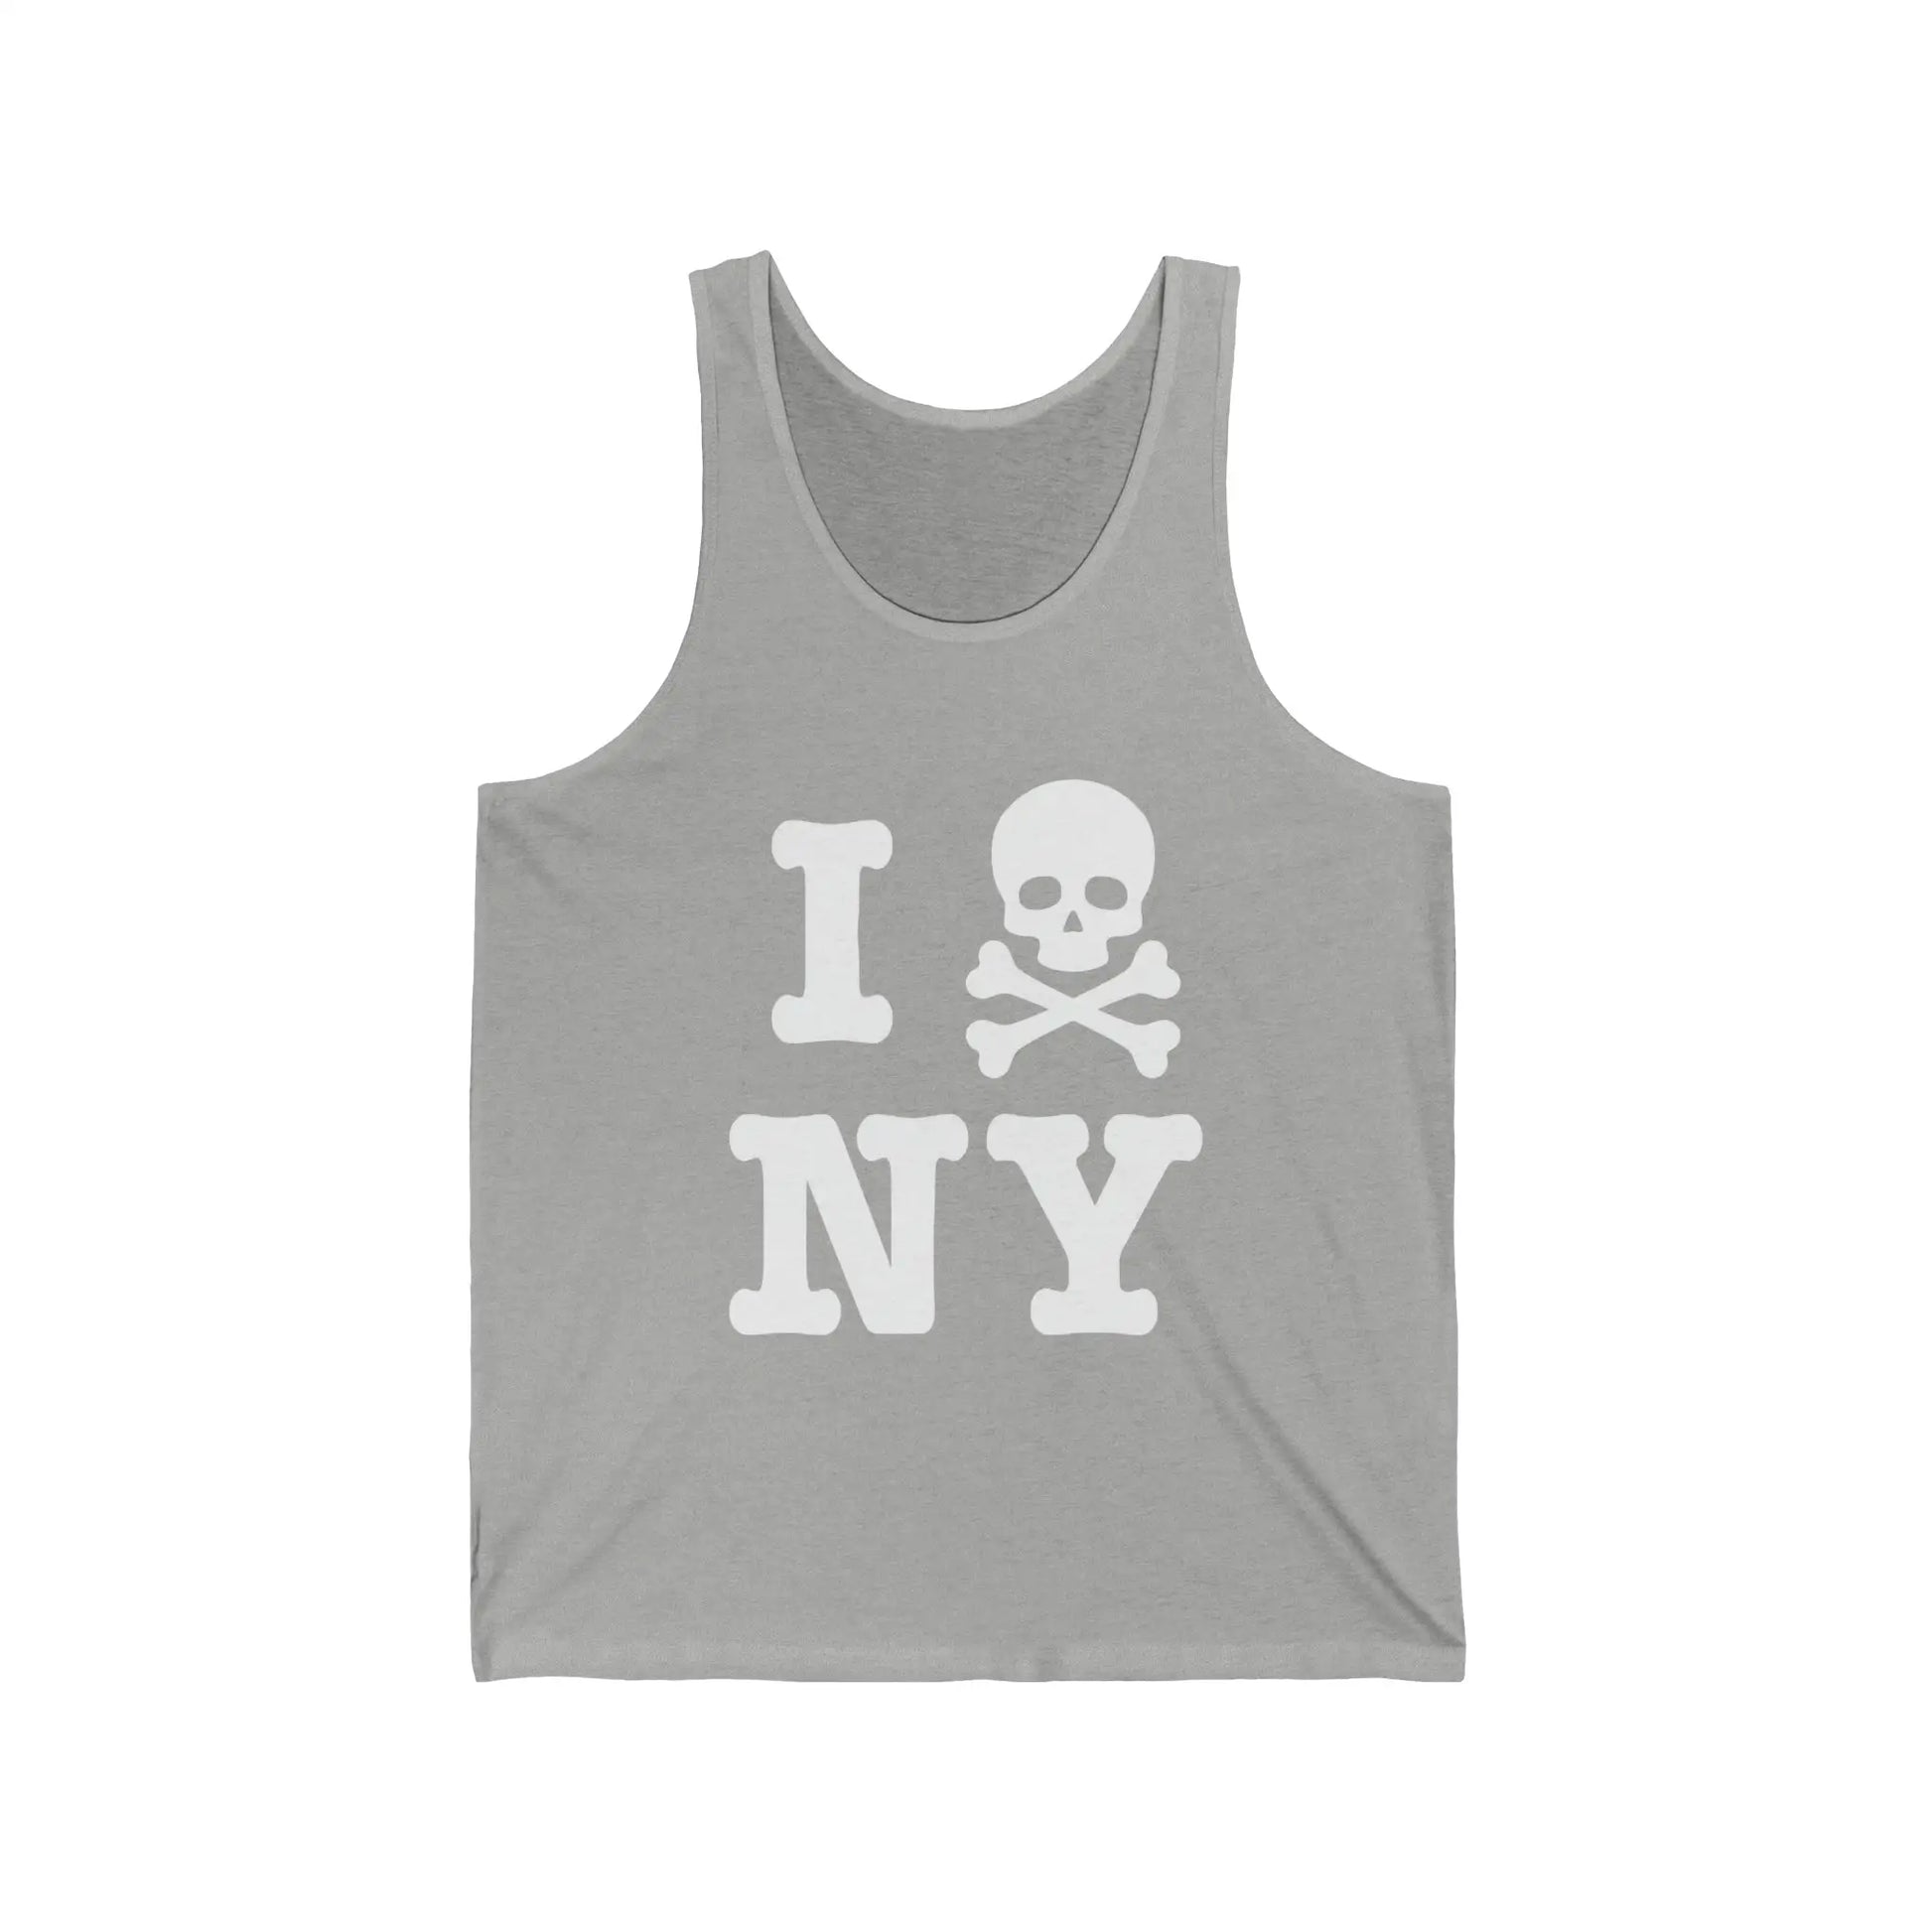 I Hate New York Men's Jersey Tank - Wicked Tees